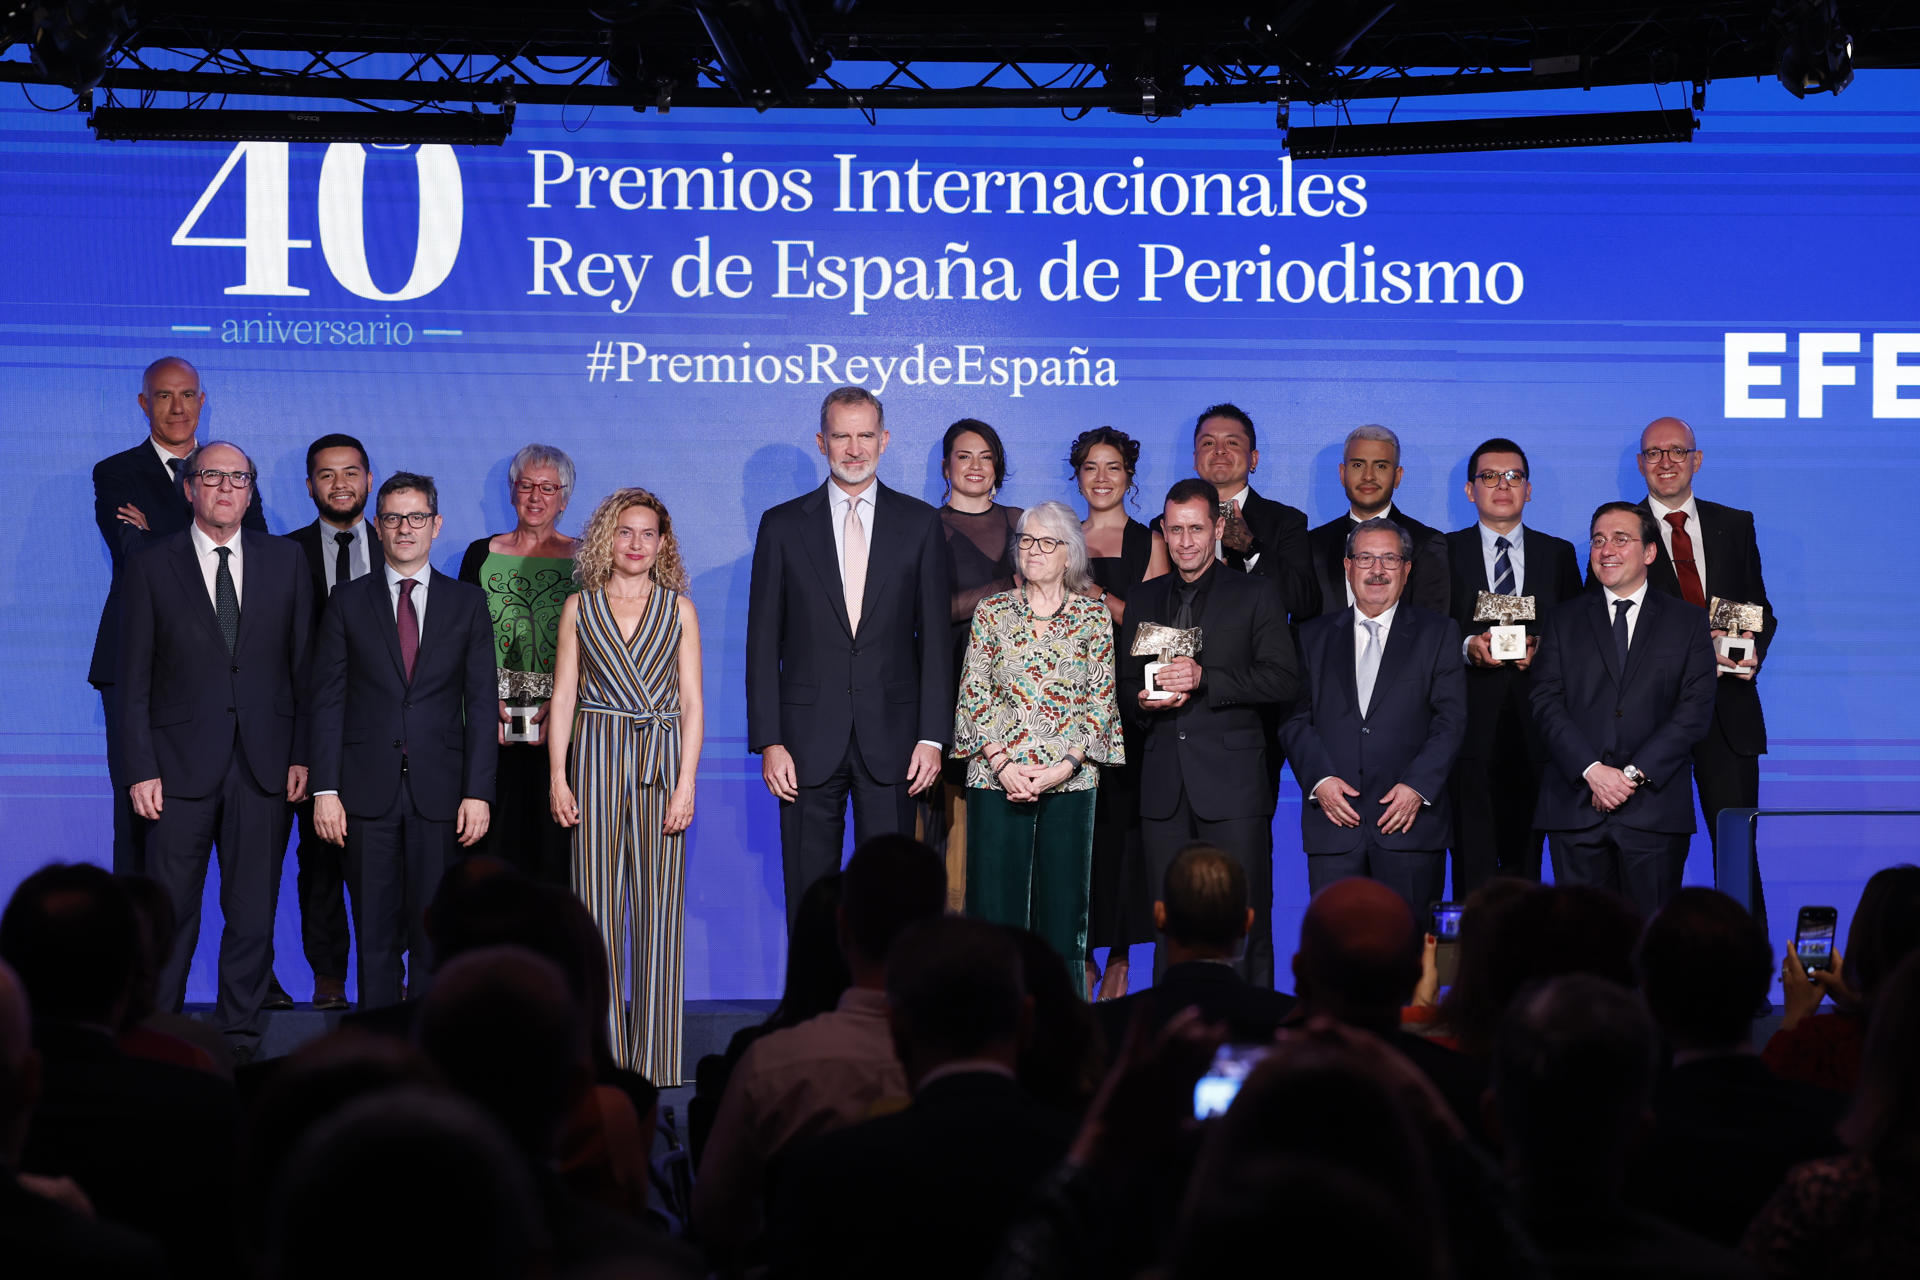 Spain's Felipe VI (c); the president of Agencia EFE, Gabriela Cañas (c-r); and assorted officials pose at the annual King of Spain International Journalism Awards, in Madrid on June 15, 2023. EFE/ Juanjo Martin